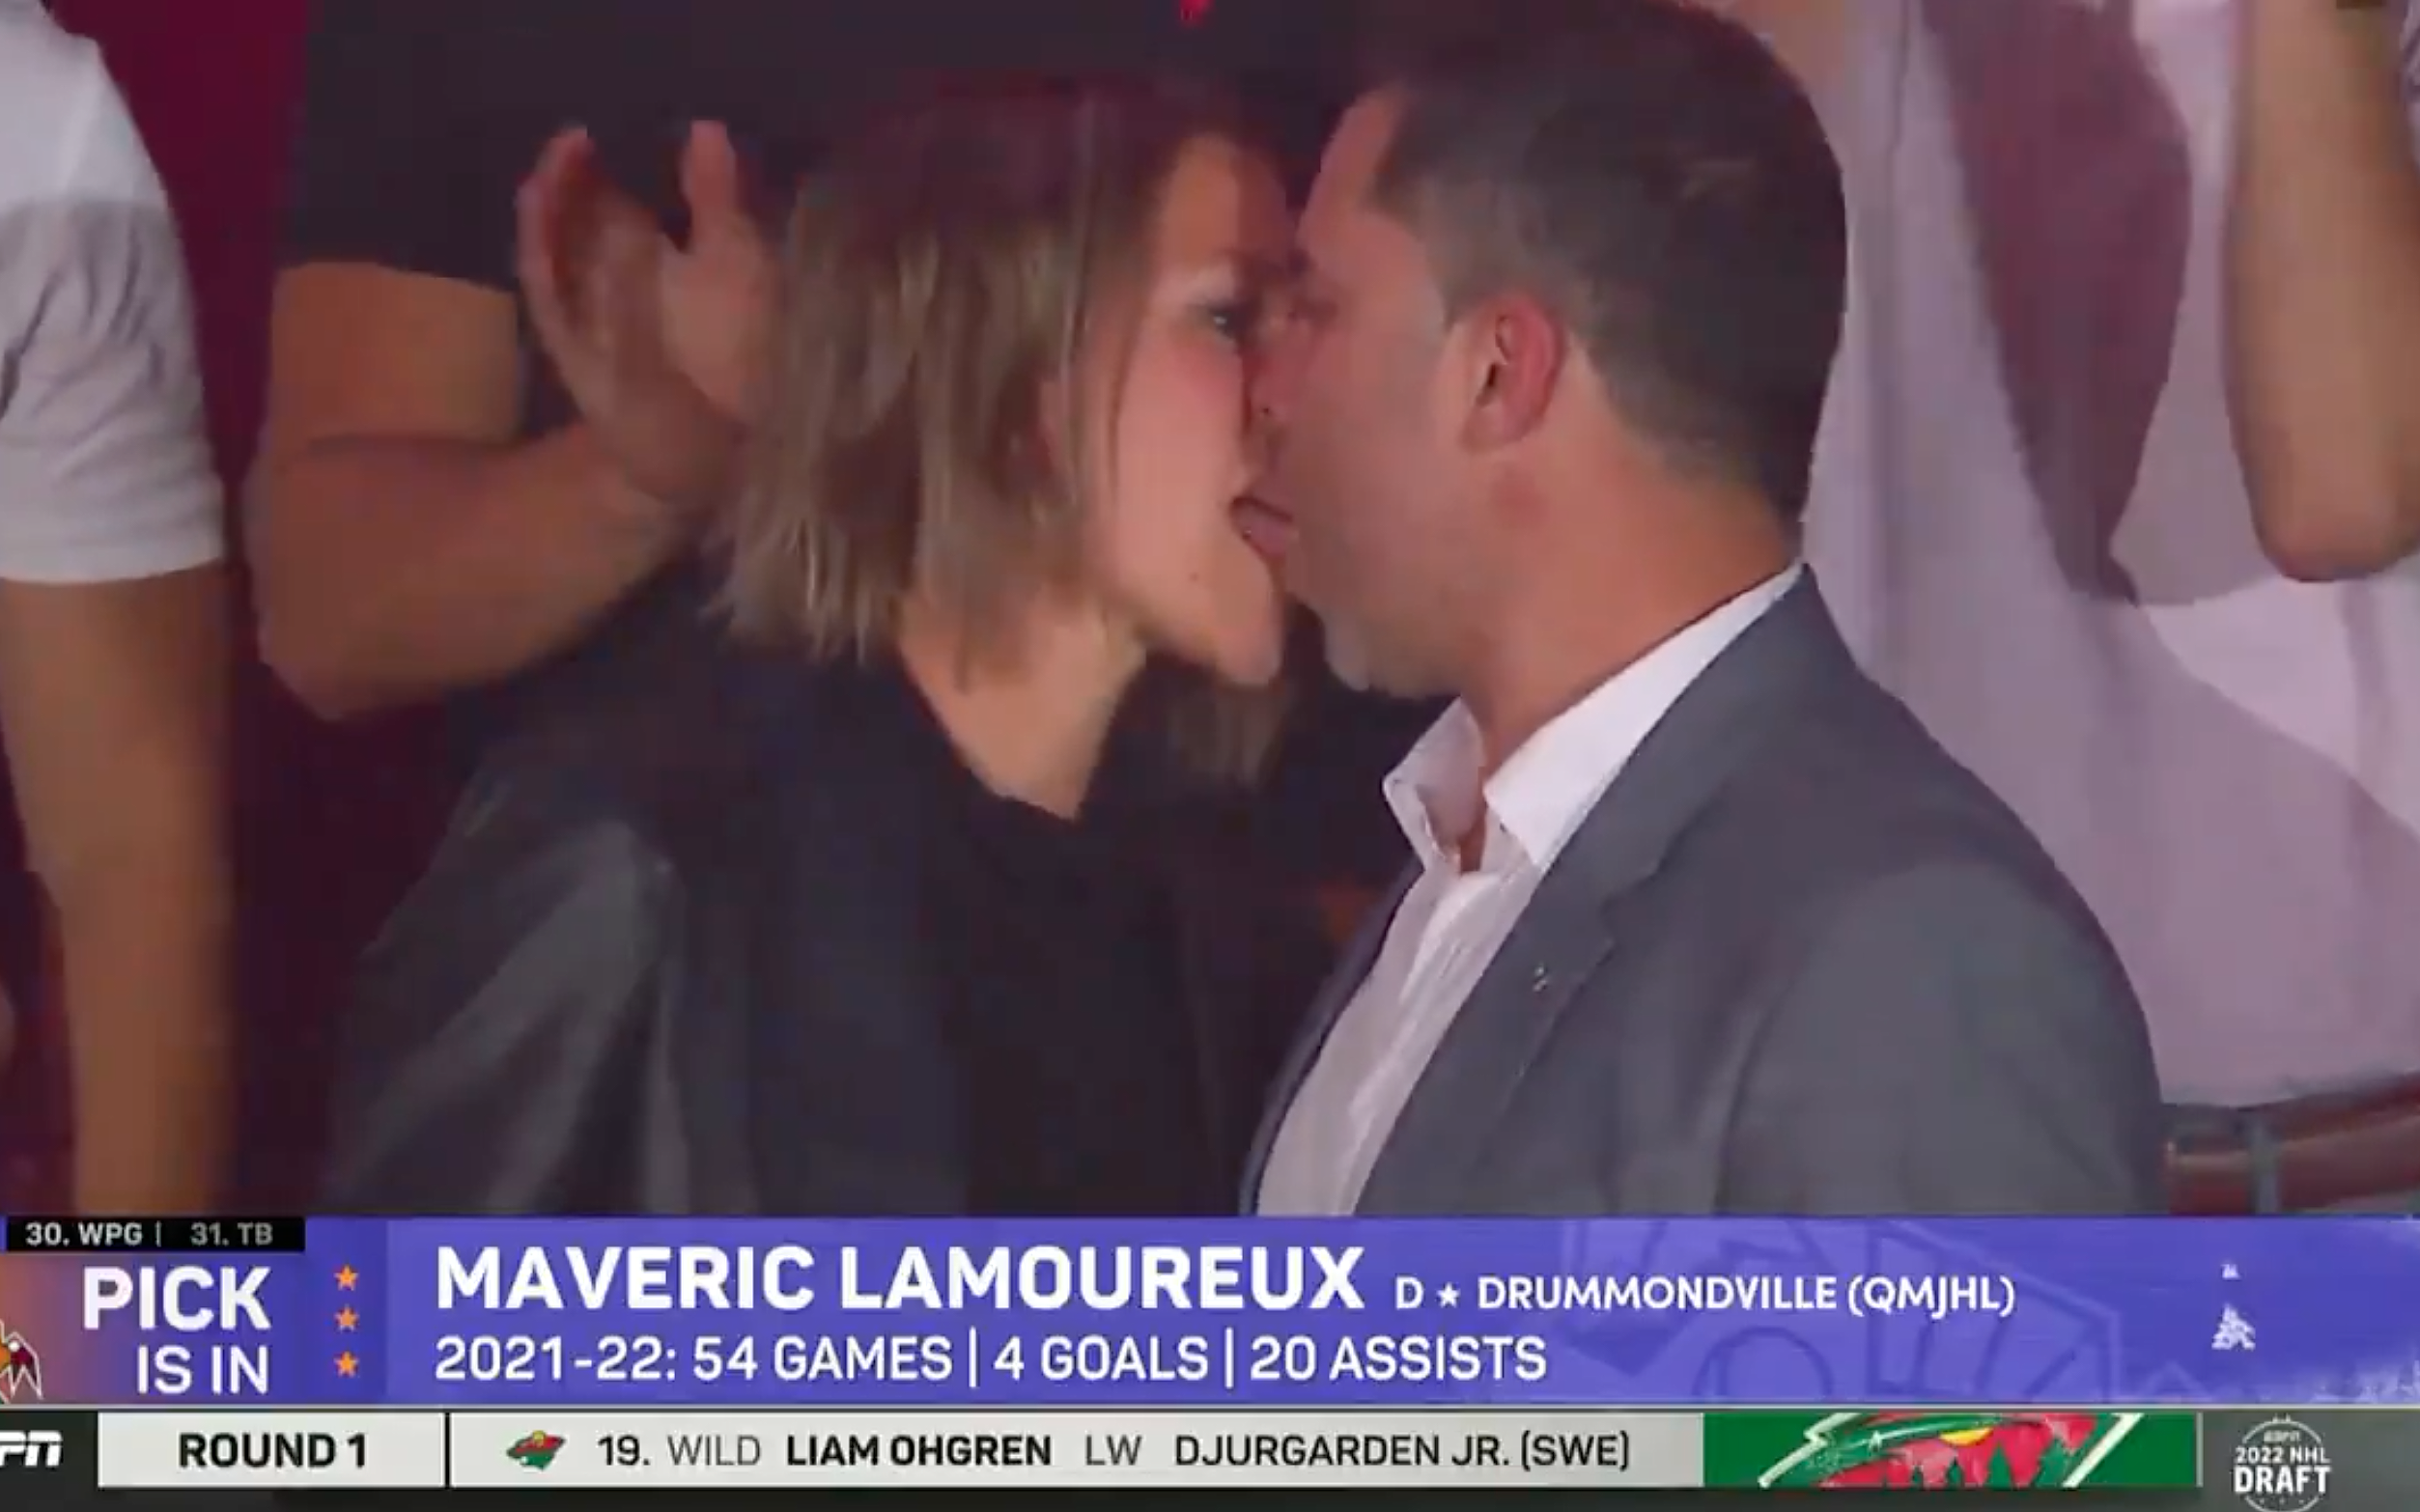 NHL Draft picks parents slip each other tongue on live TV after son selected 29th overall by the Coyotes This is the Loop GolfDigest